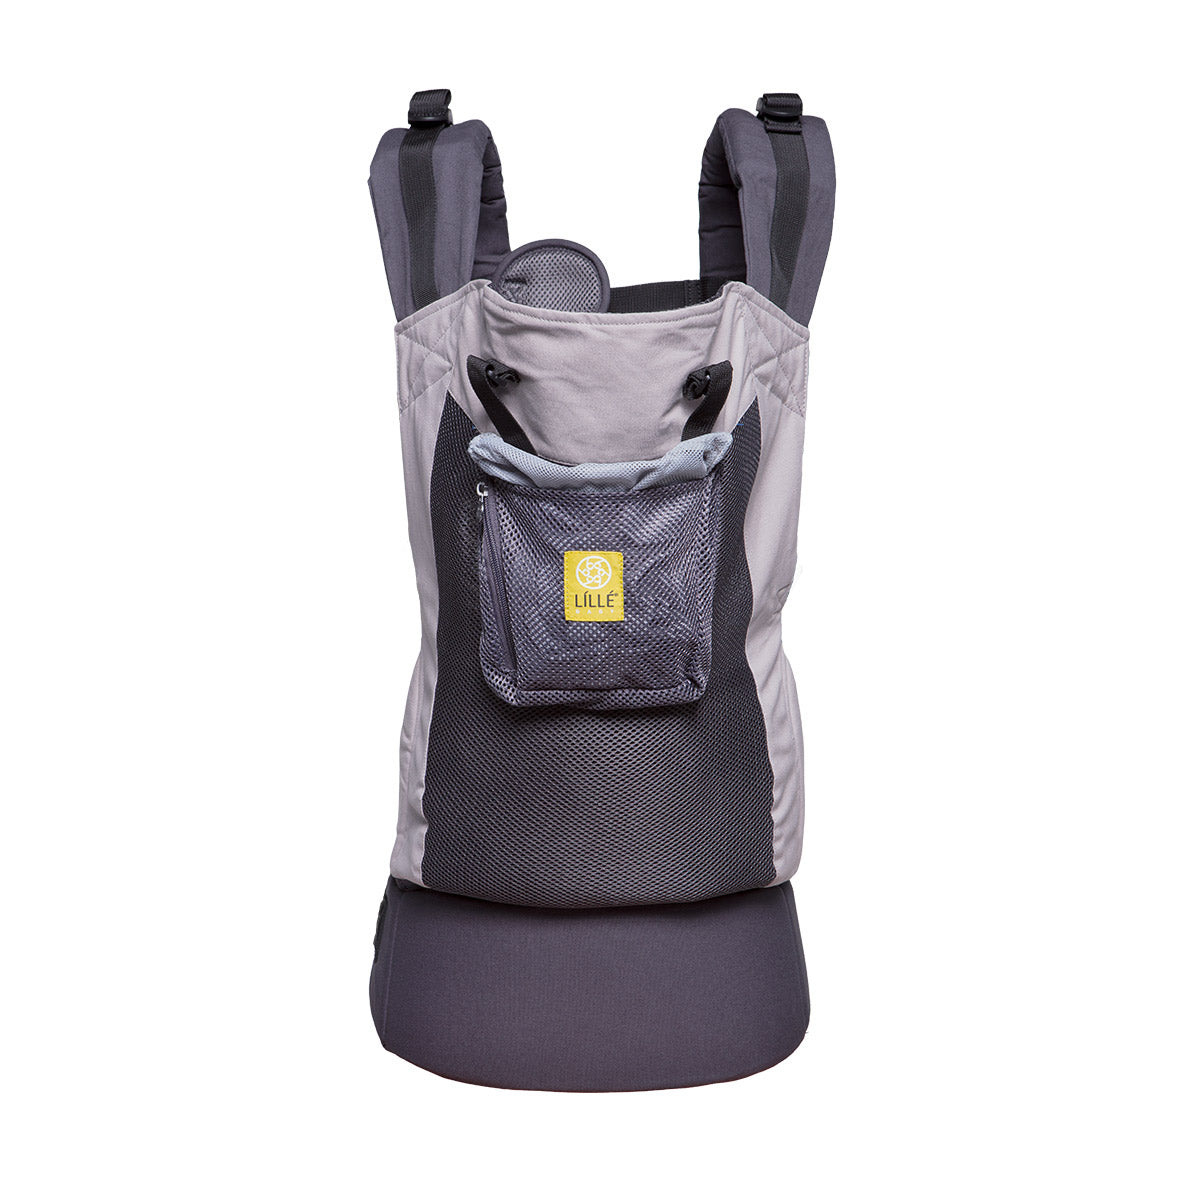 lillebaby carryon airflow baby carrier in charcoal silver